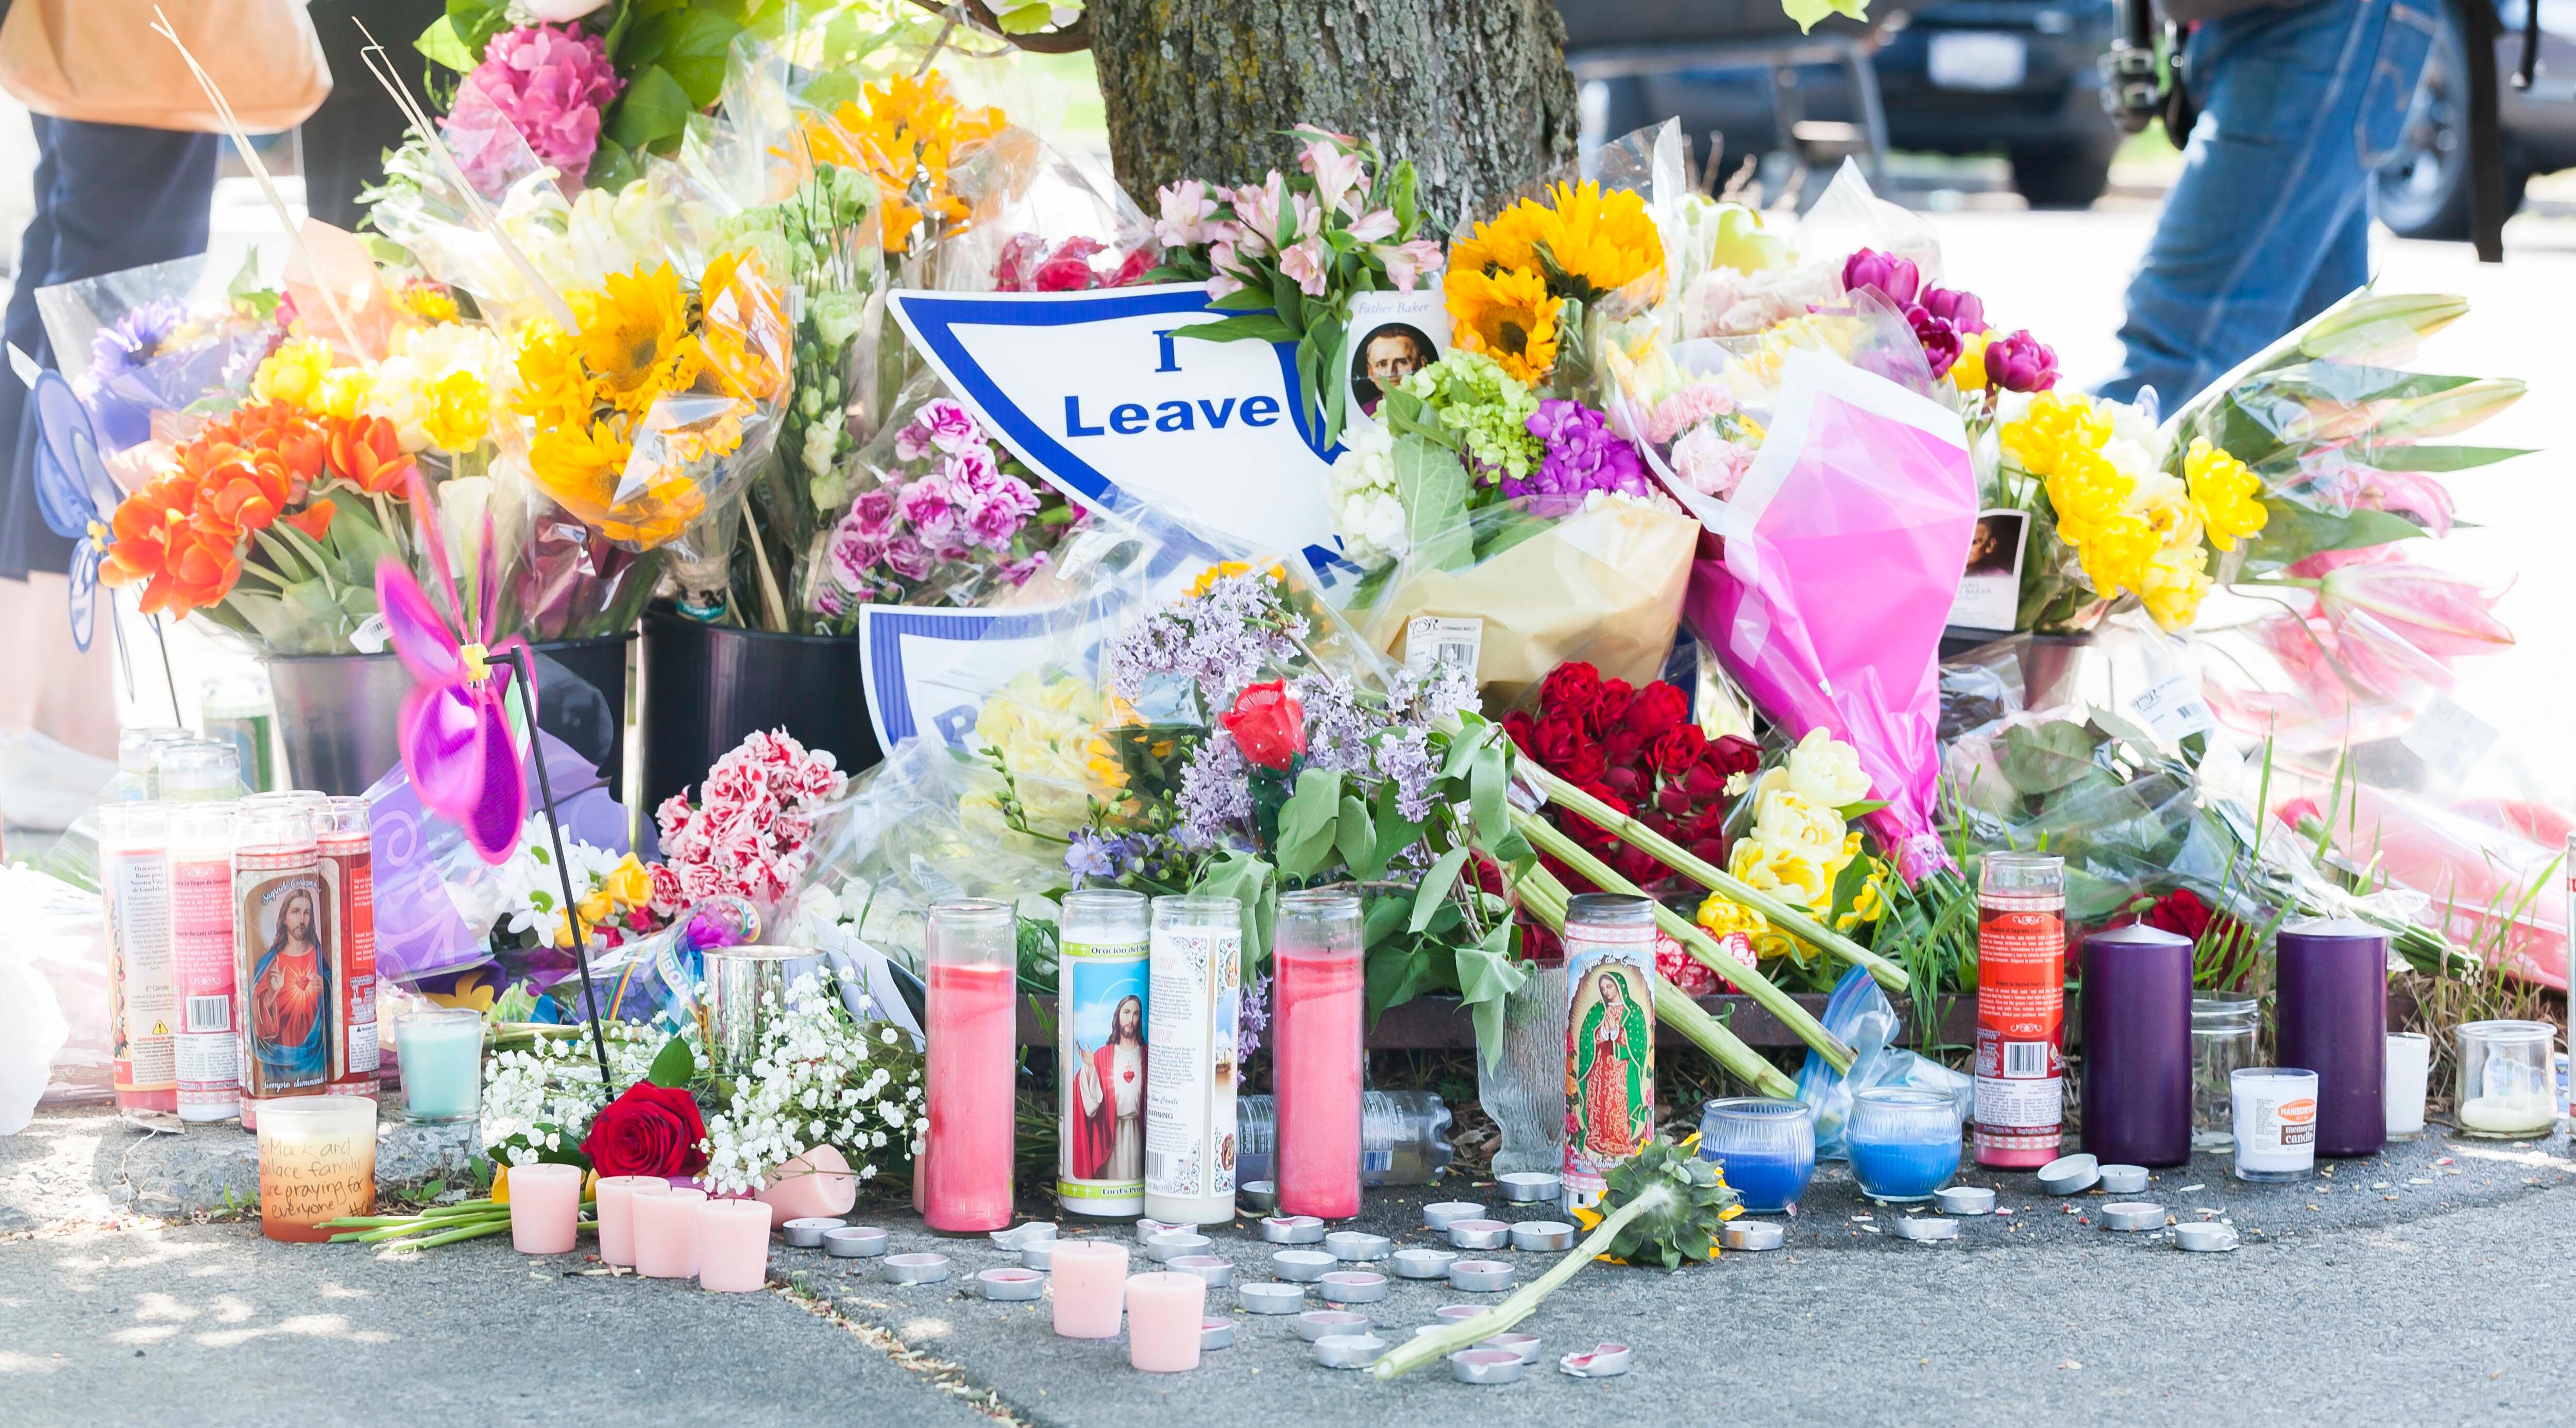 A memorial to the victims near the site of yesterday's shooting at a Tops Friendly Market grocery store in Buffalo, New York, USA.